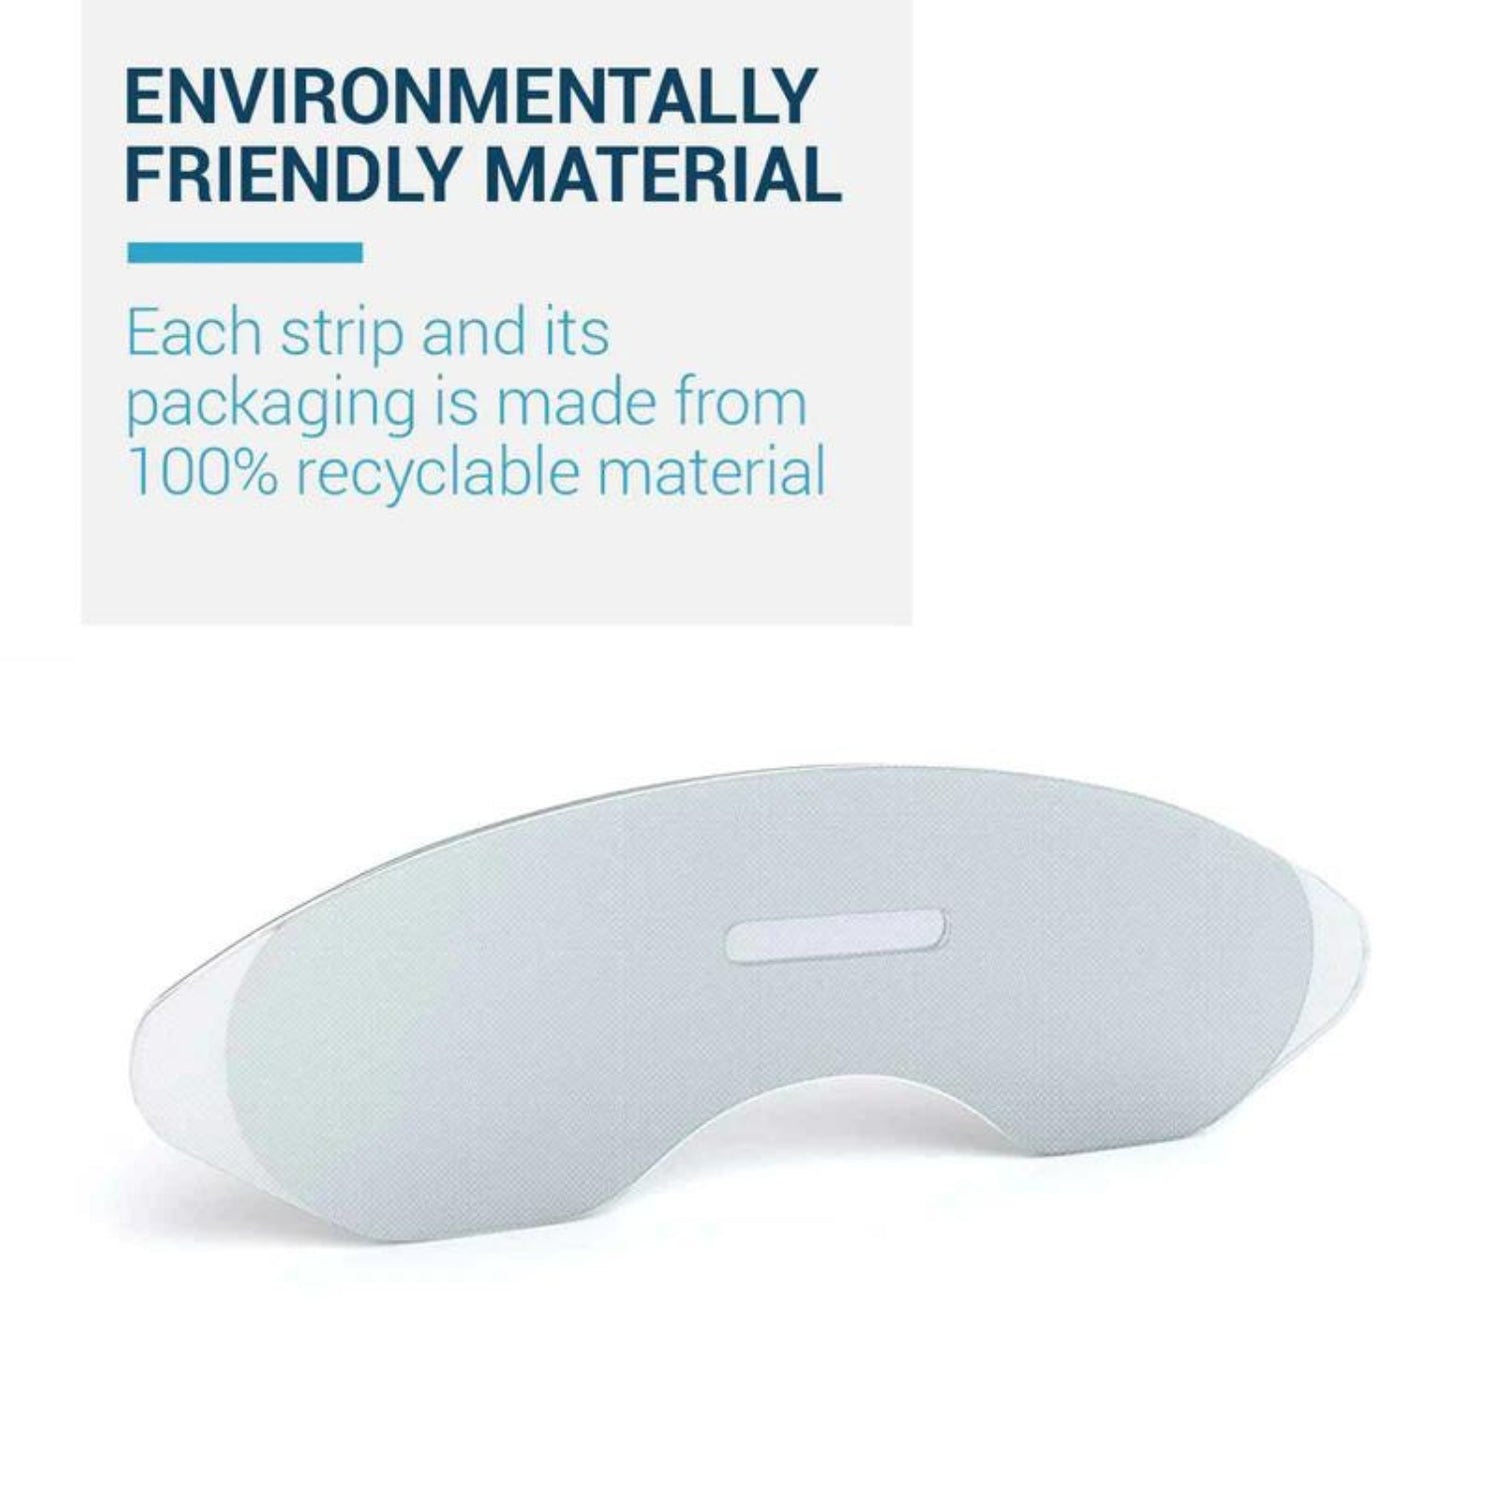 friendly-material-recyclable